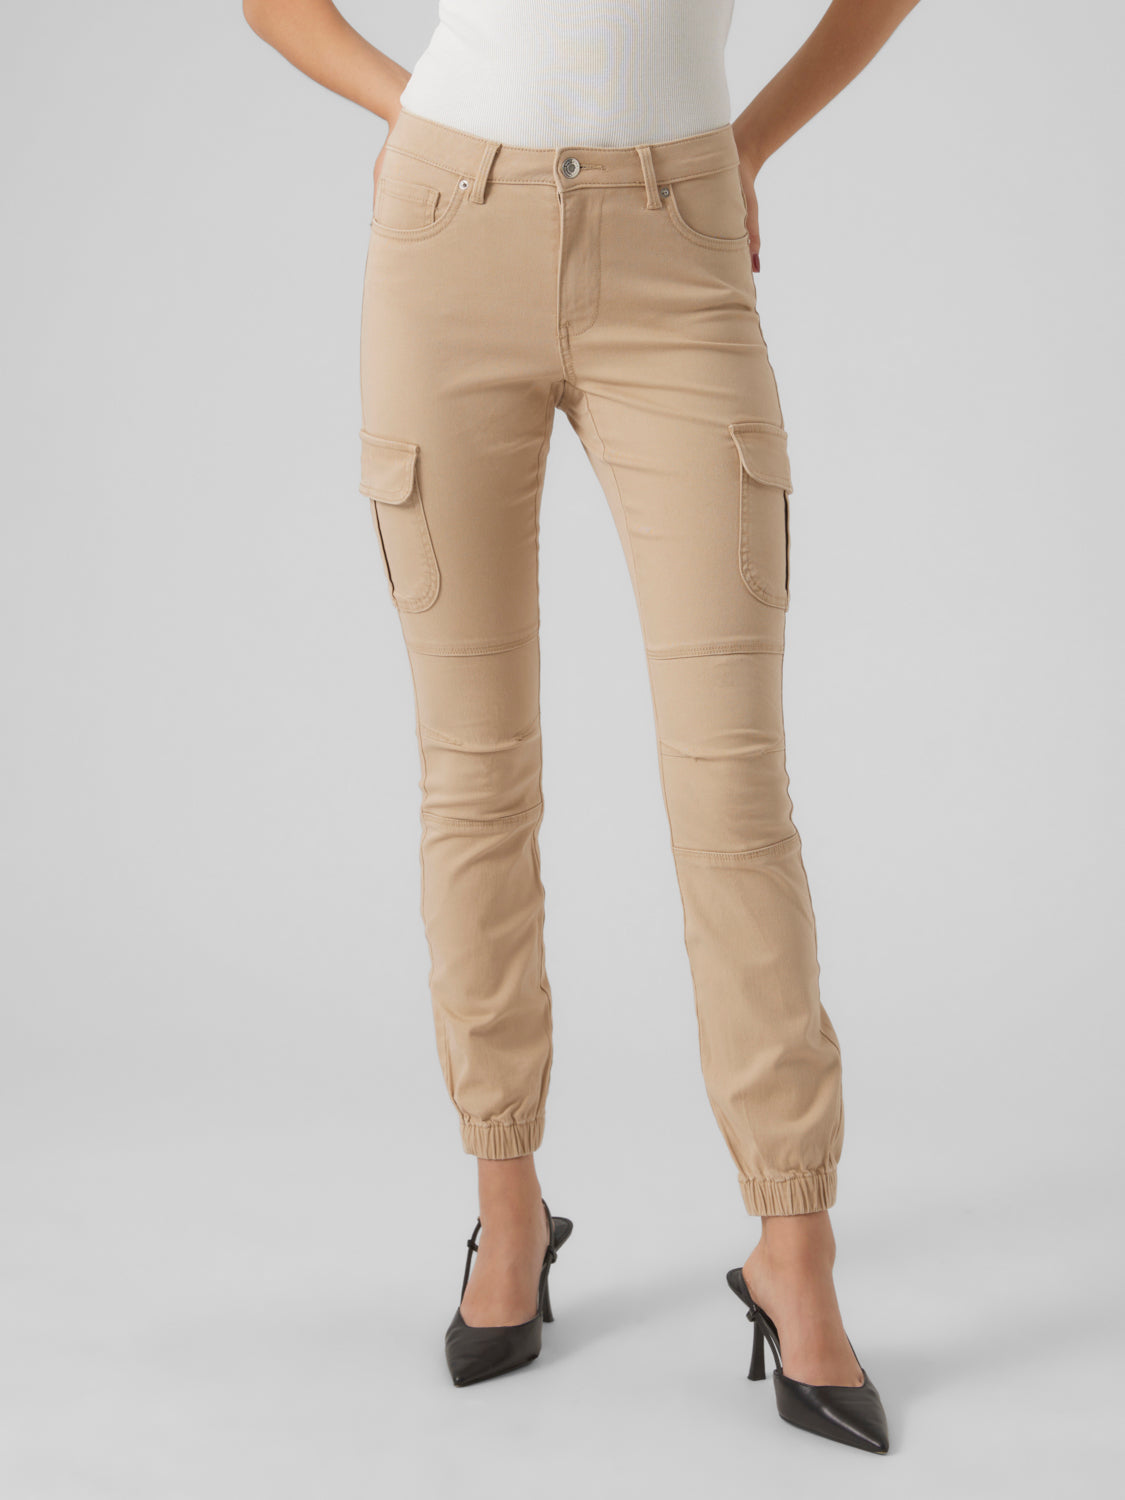 VMIVY cargo pants - Nomad